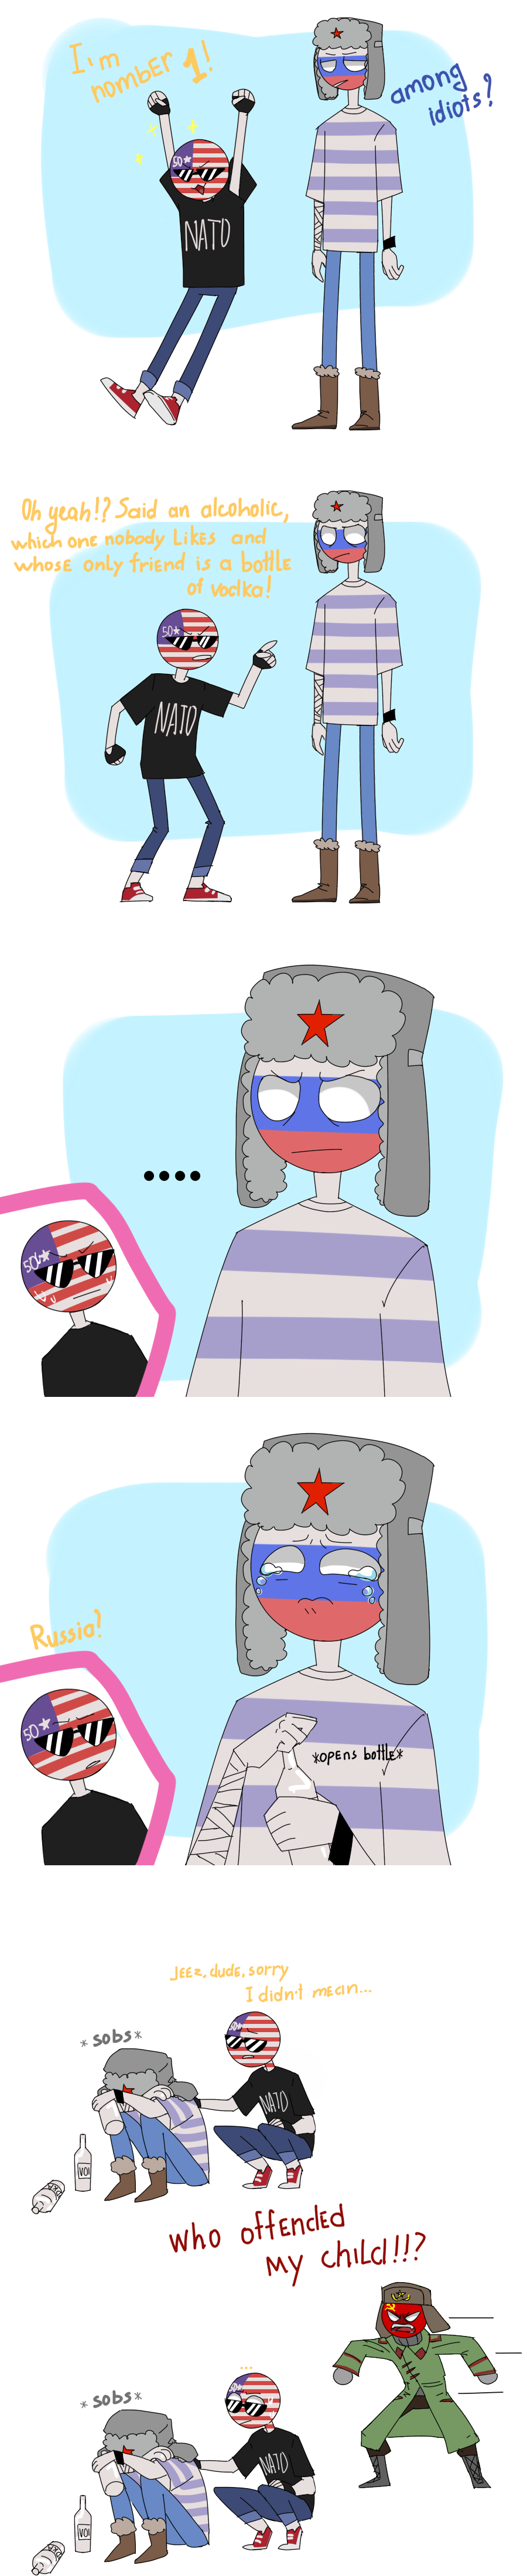 Russia and USA [Countryhumans/balls] by LuluDig on DeviantArt